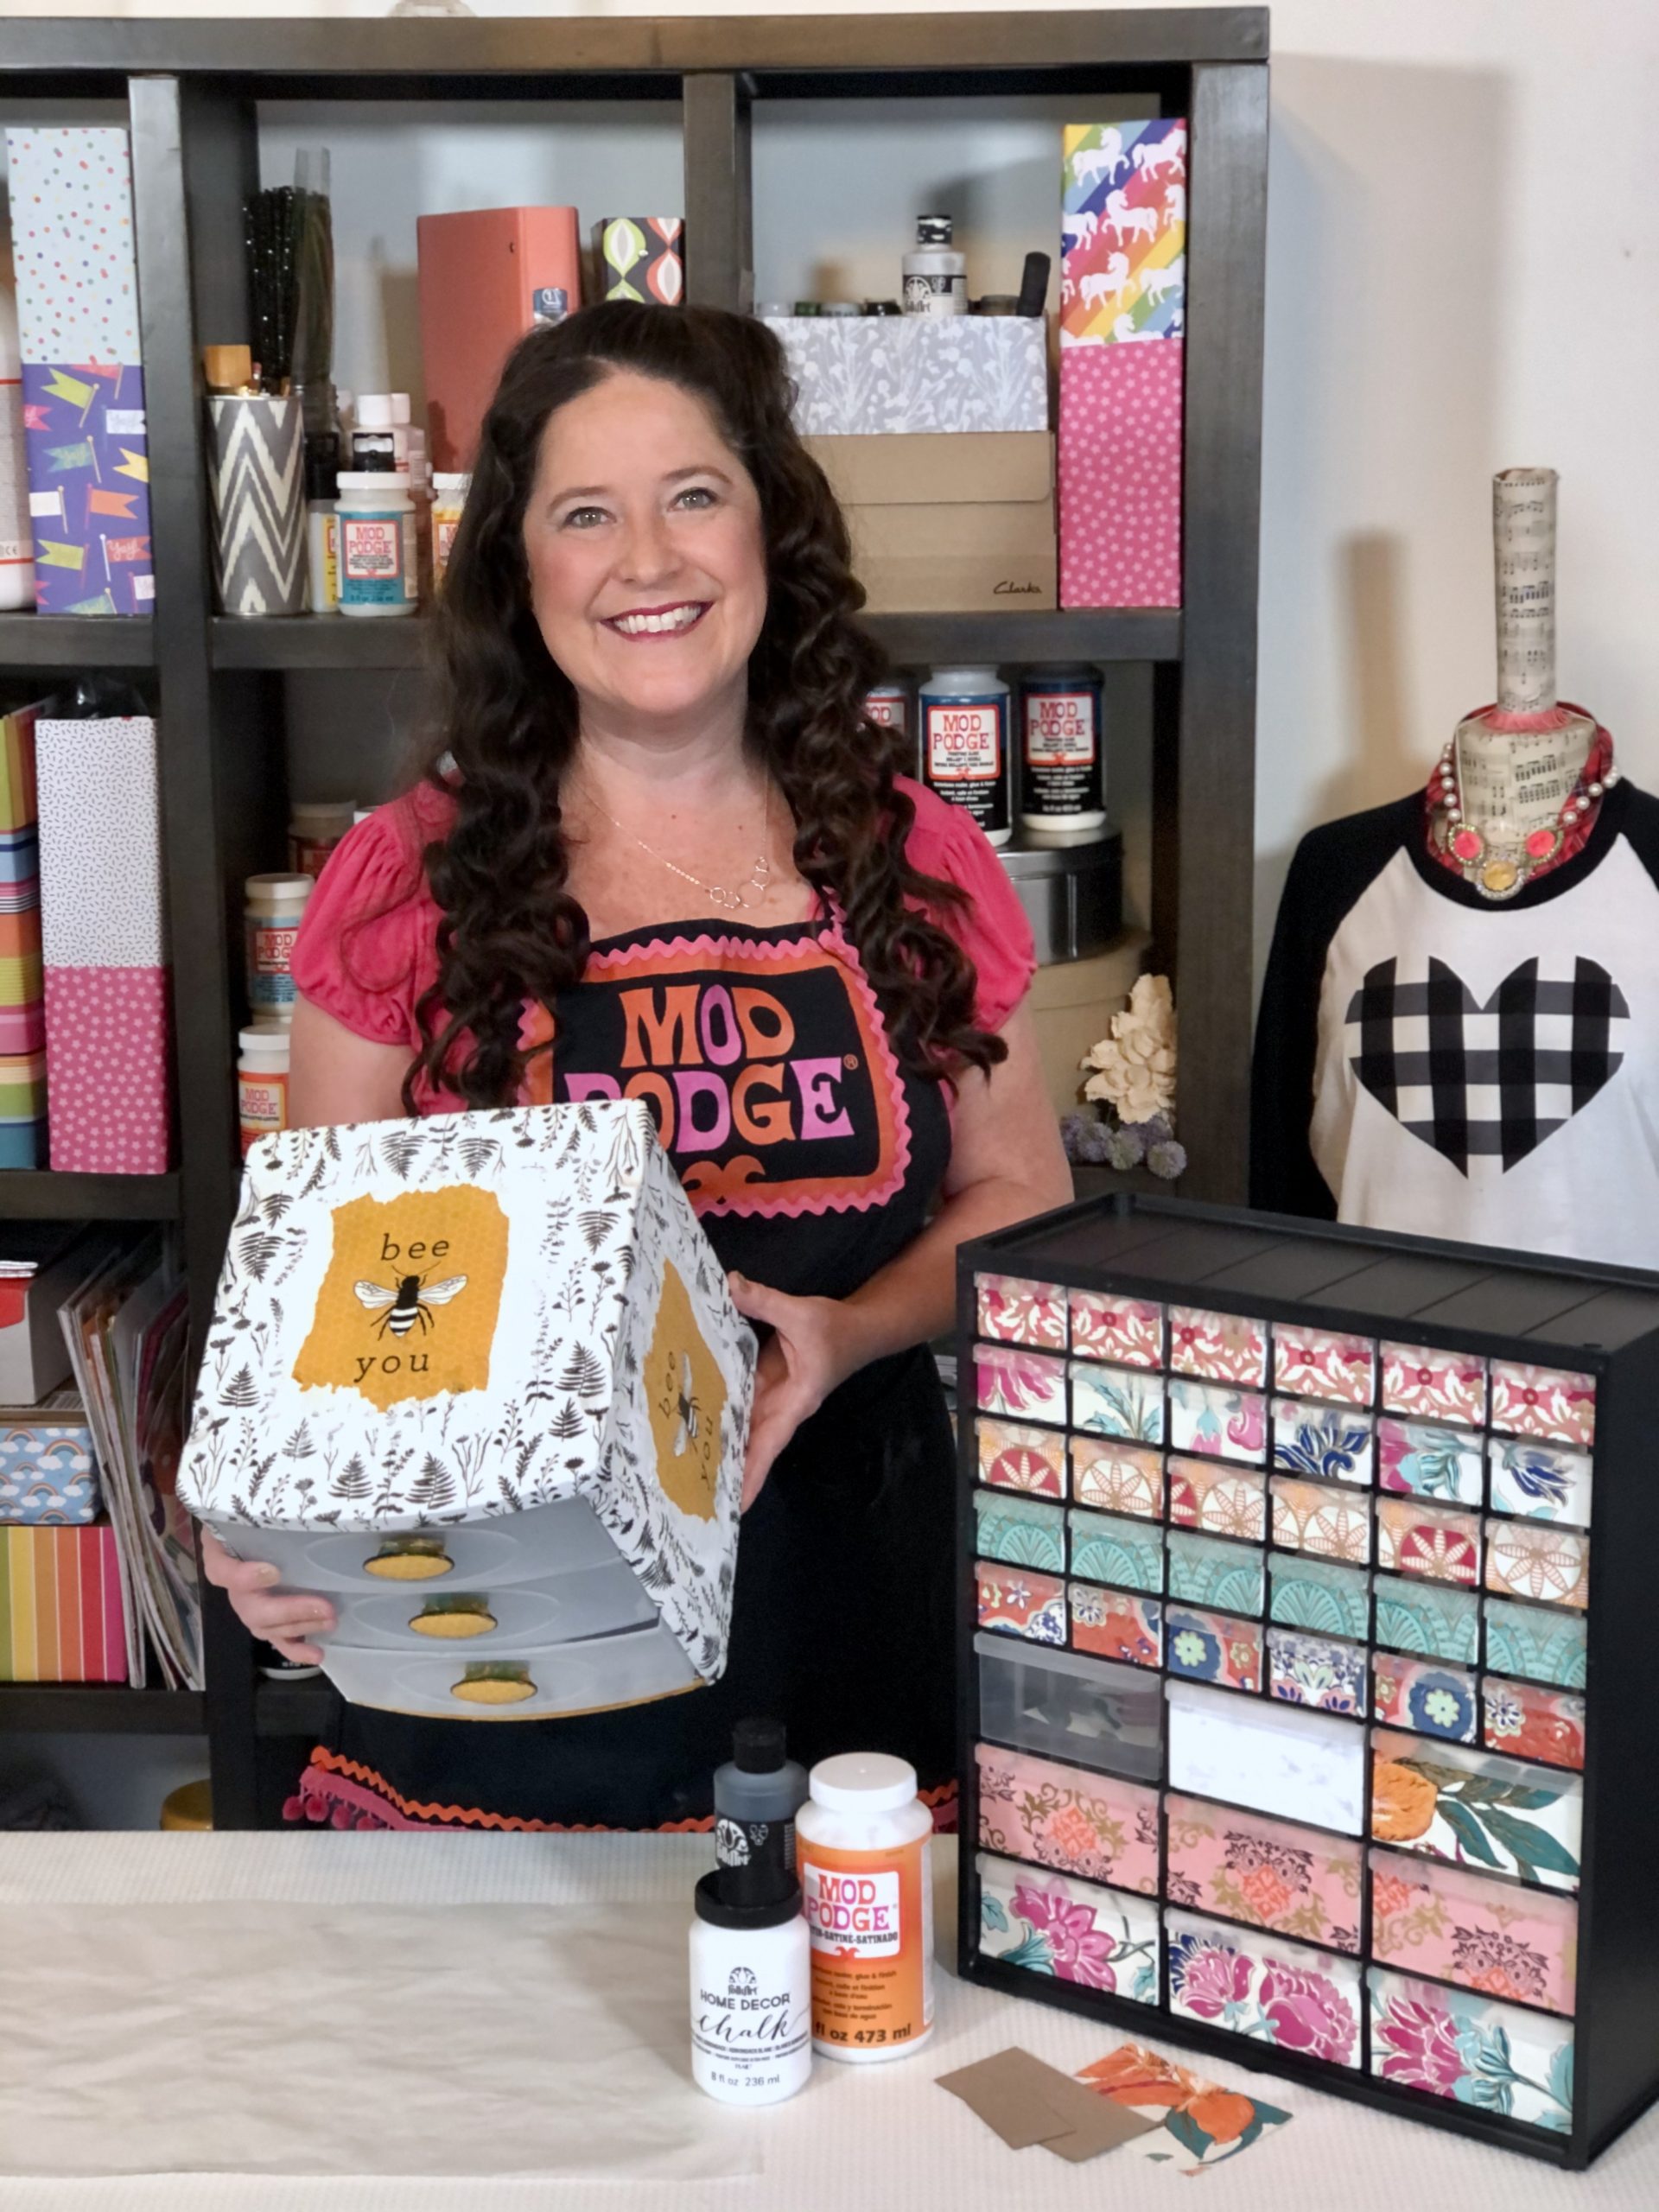 Craft Storage Box Makeovers with Mod Podge and Artbin - CATHIE FILIAN's  Handmade Happy Hour